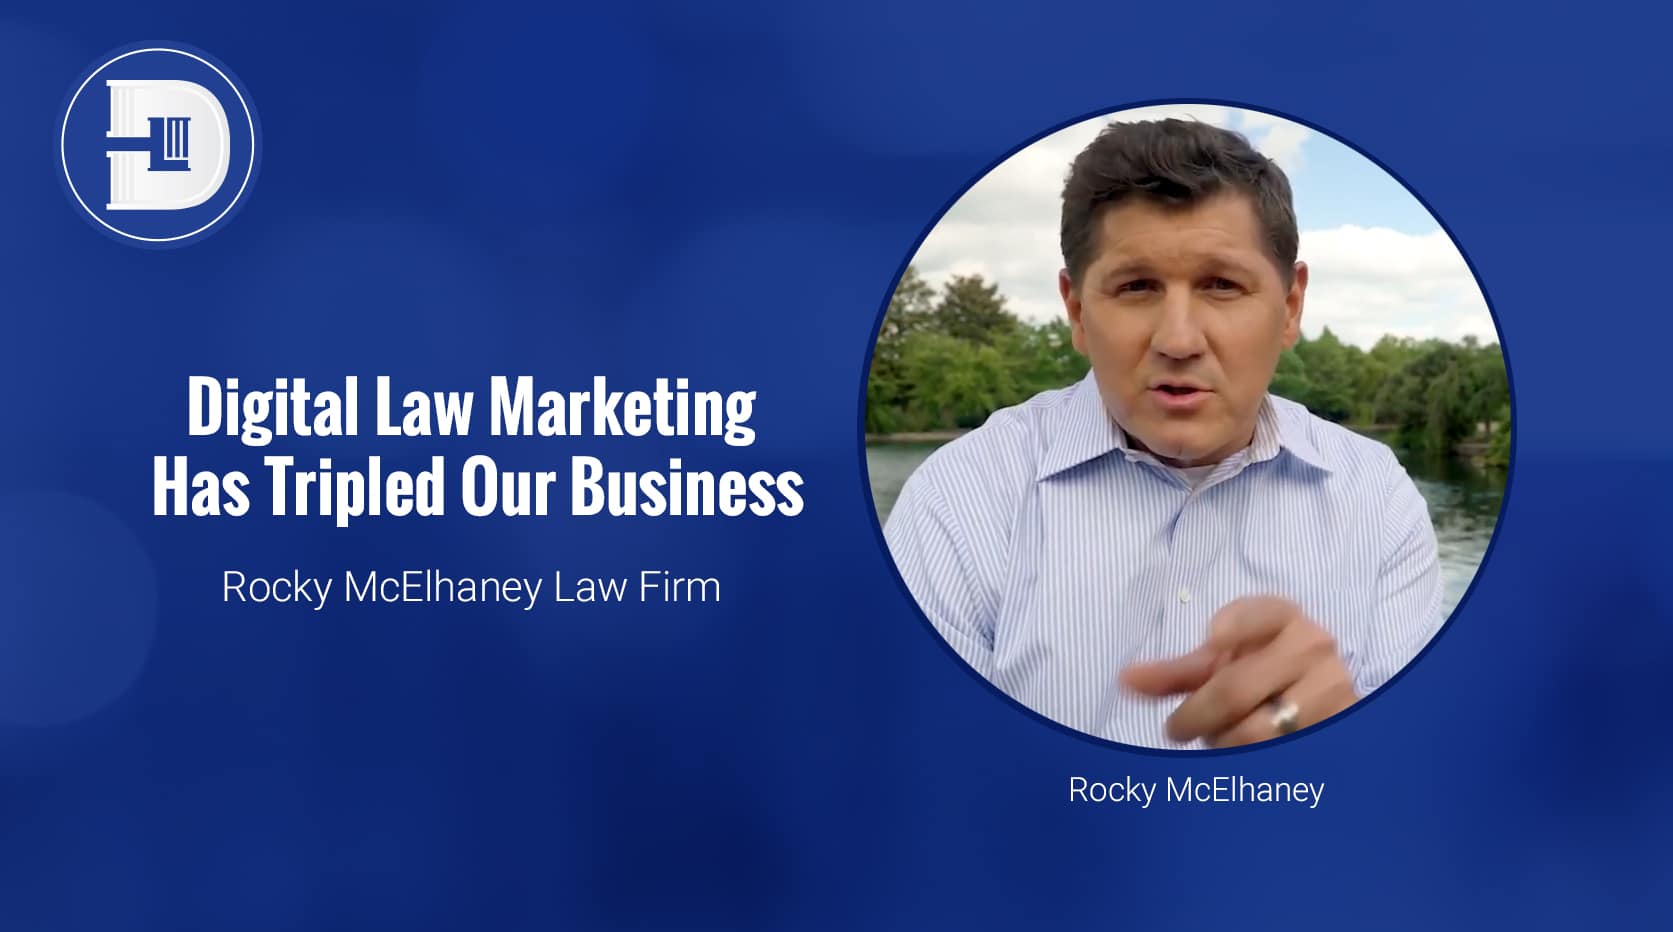 Rocky McElhaney - DLM Tripled Our Business